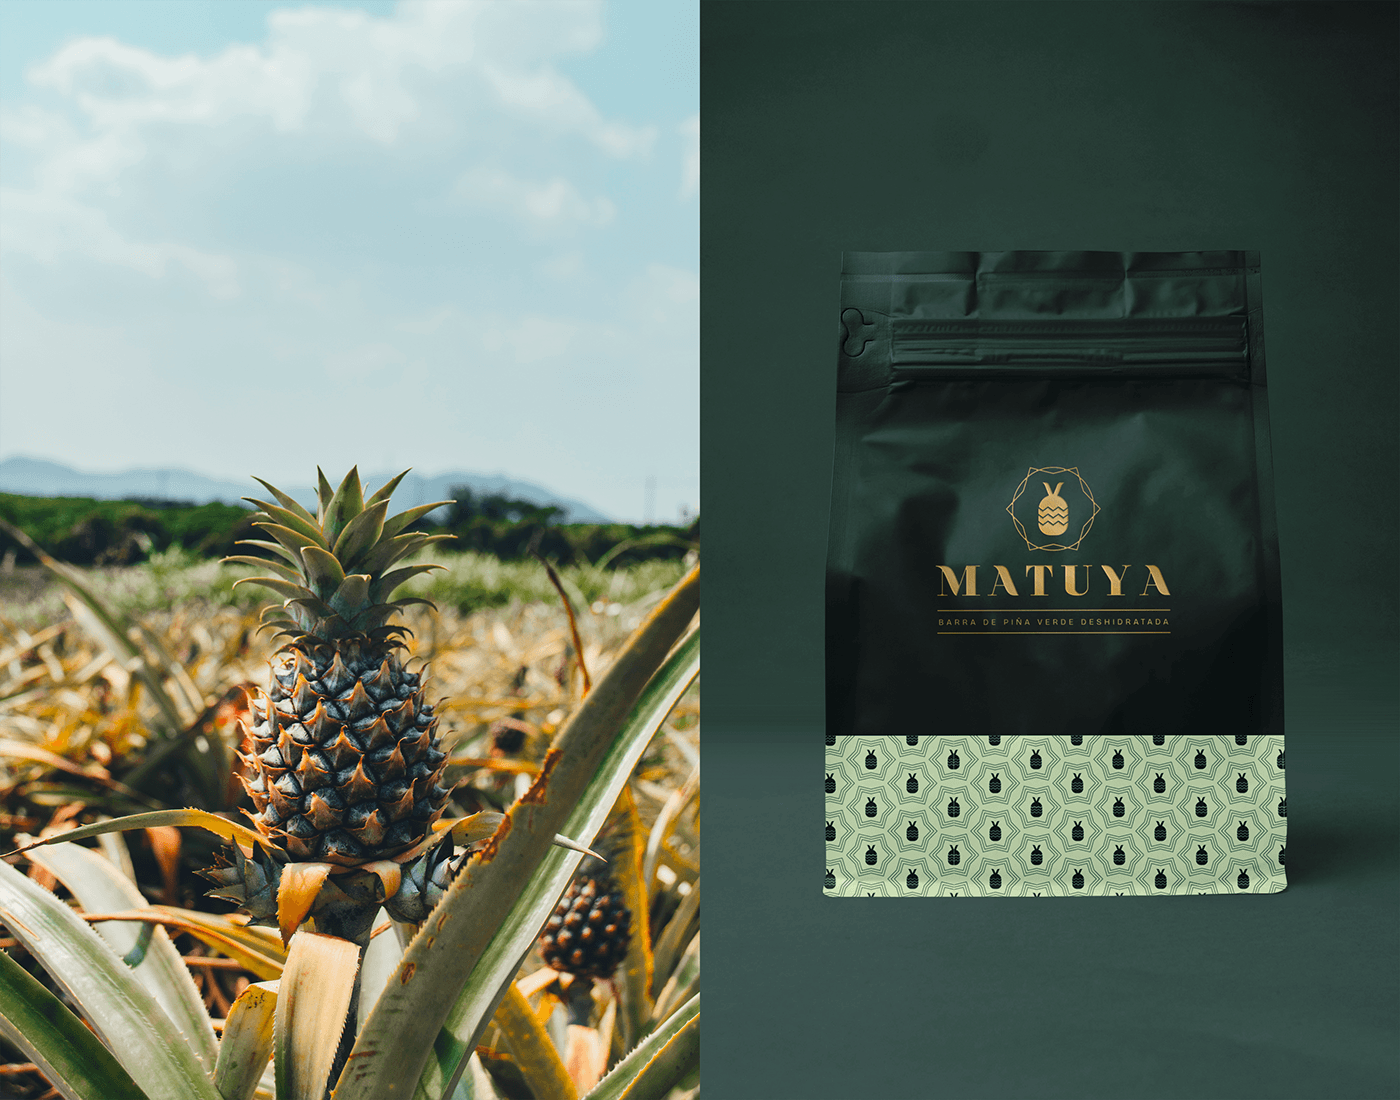 Collateral design for a pineapple brand